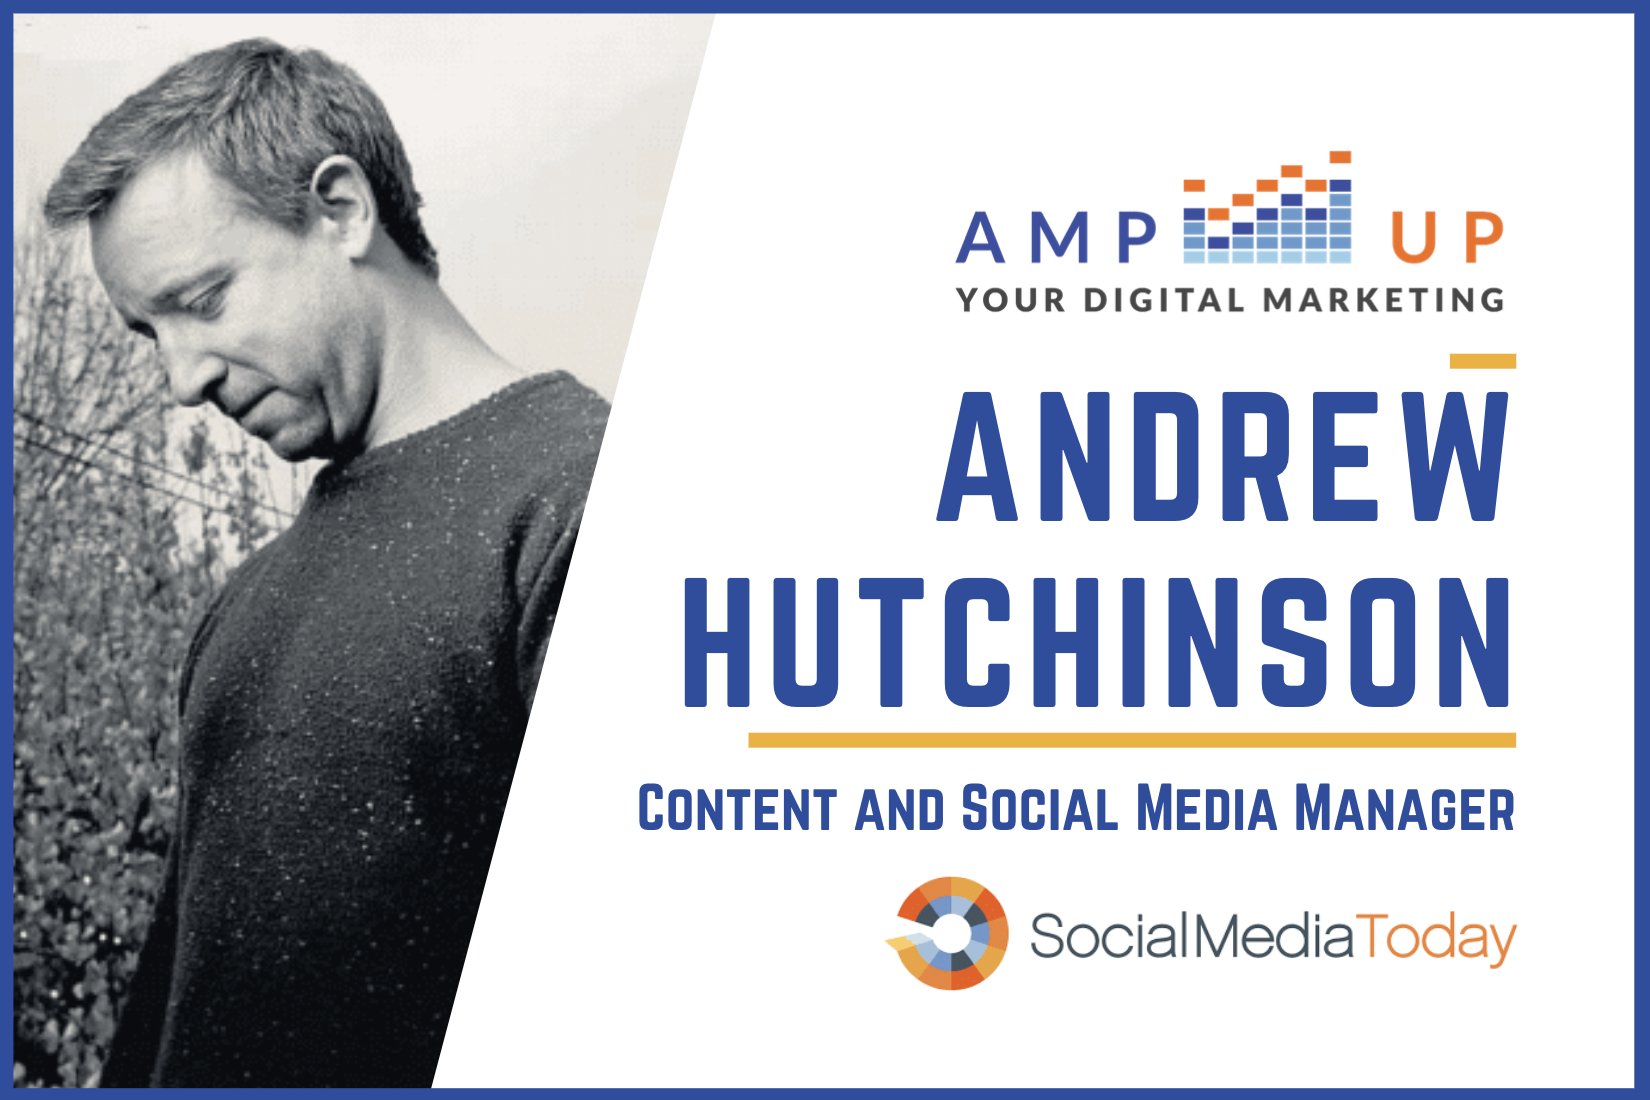 Andrew Hutchinson of Social Media Today on building the case for employee advocacy